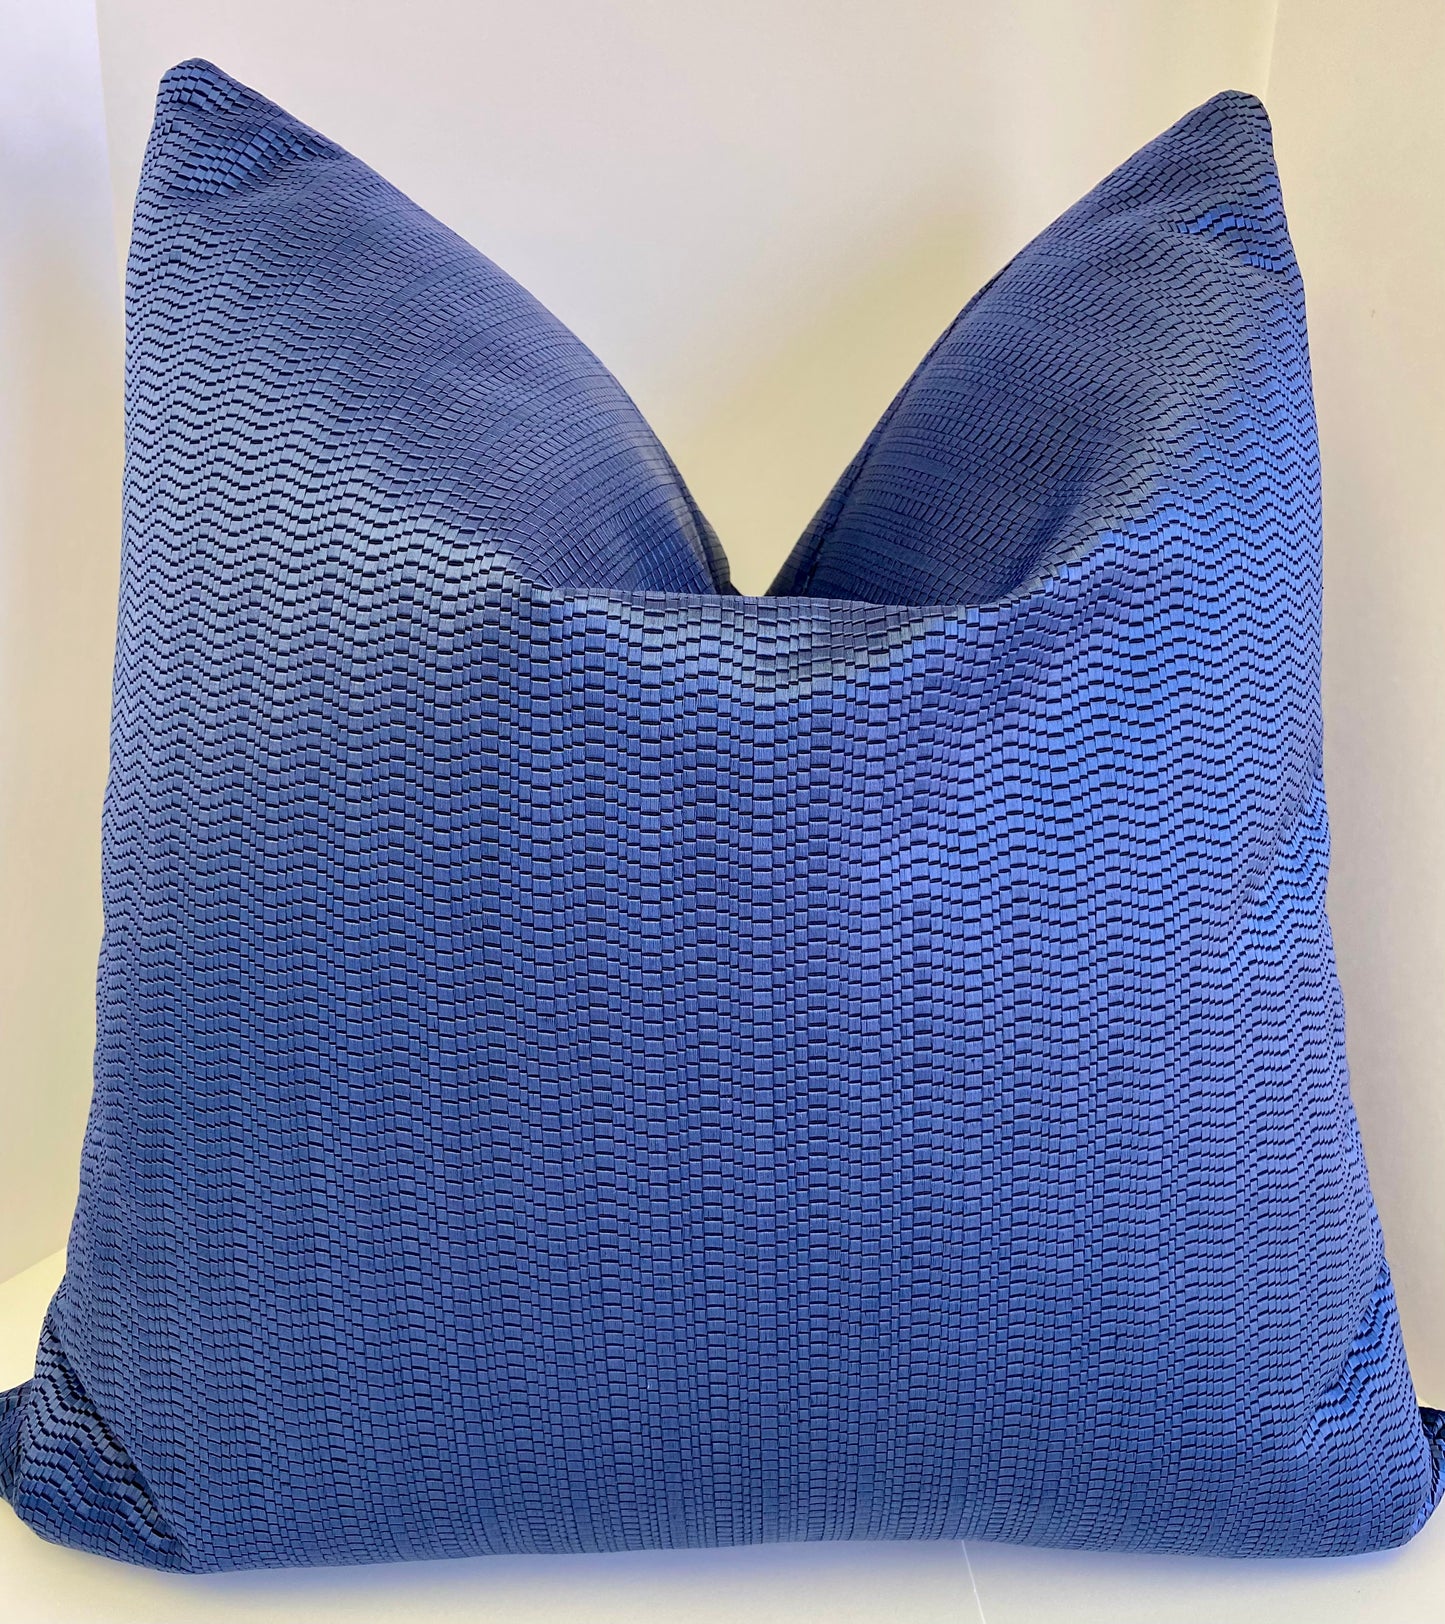 Luxury Pillow - 24" x 24" - Chainmail; An intricate weave pattern in bright blue